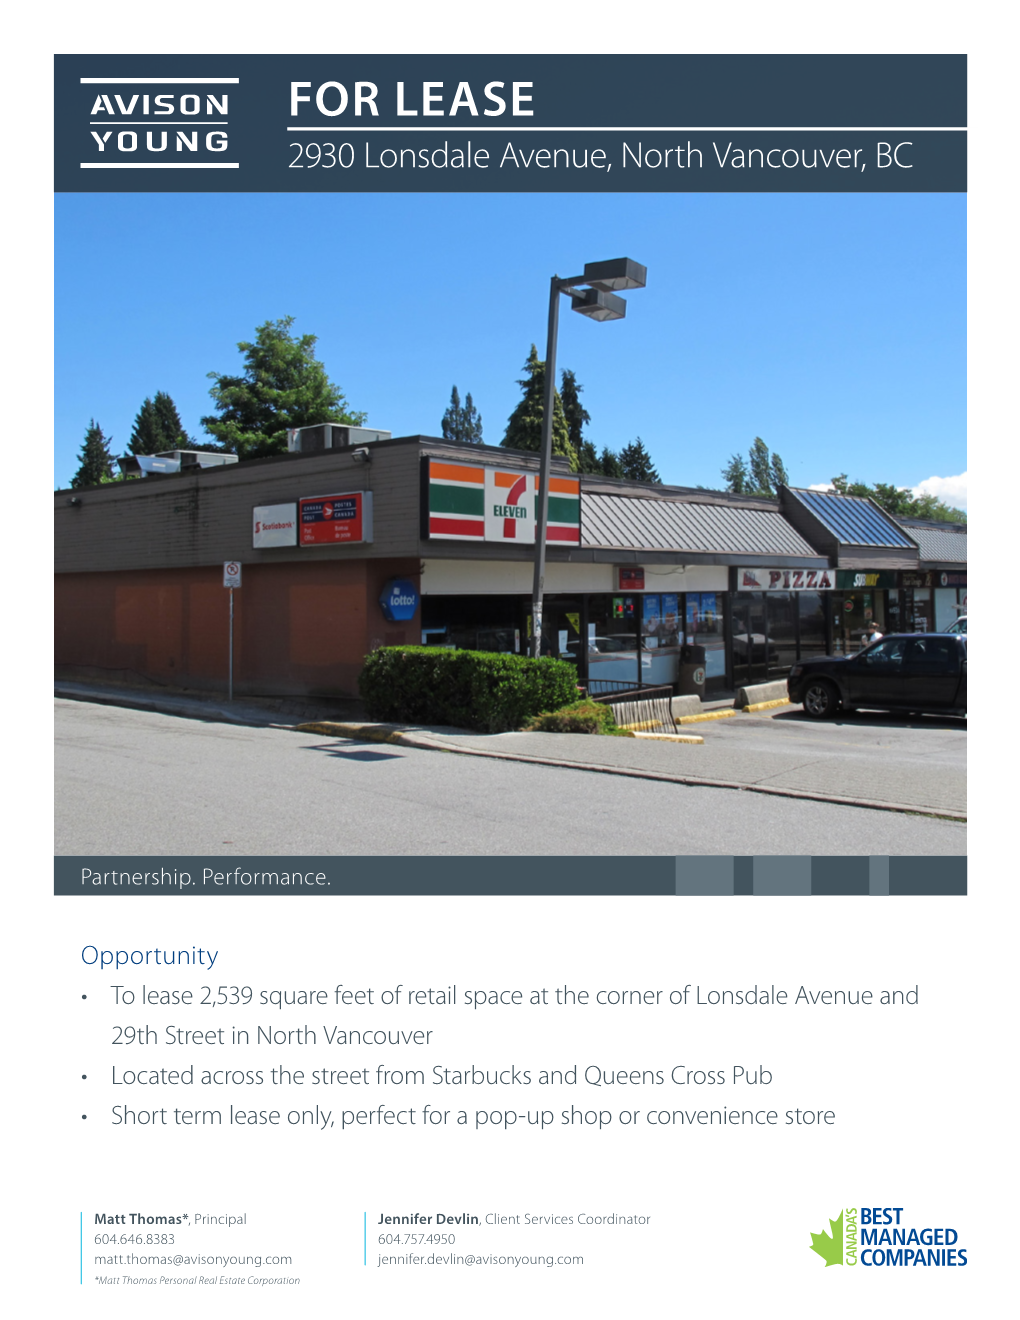 FOR LEASE 2930 Lonsdale Avenue, North Vancouver, BC